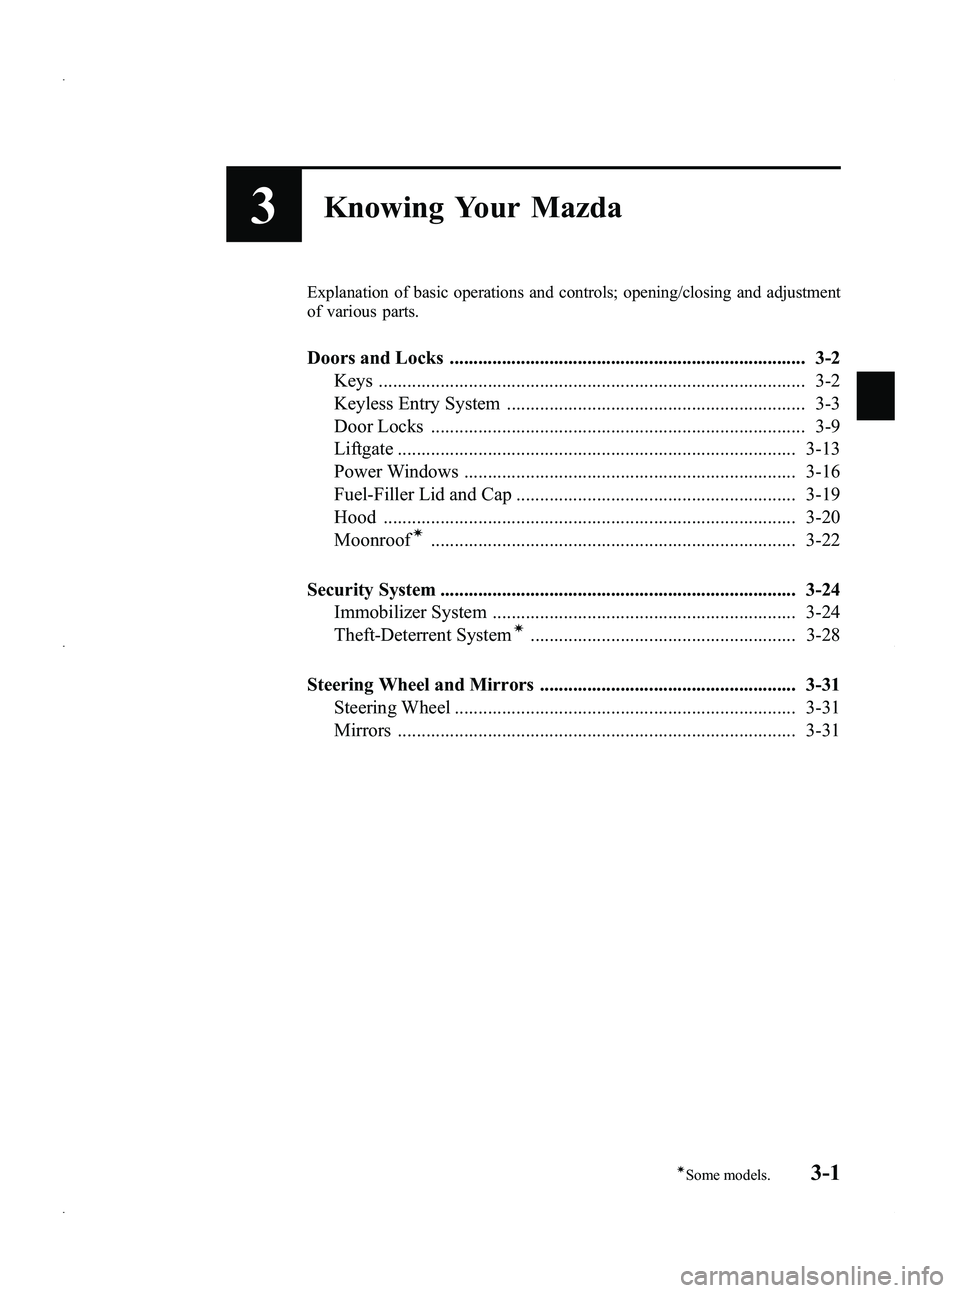 MAZDA MODEL 5 2013  Owners Manual Black plate (79,1)
3Knowing Your Mazda
Explanation of basic operations and controls; opening/closing and adjustment
of various parts.
Doors and Locks ..................................................